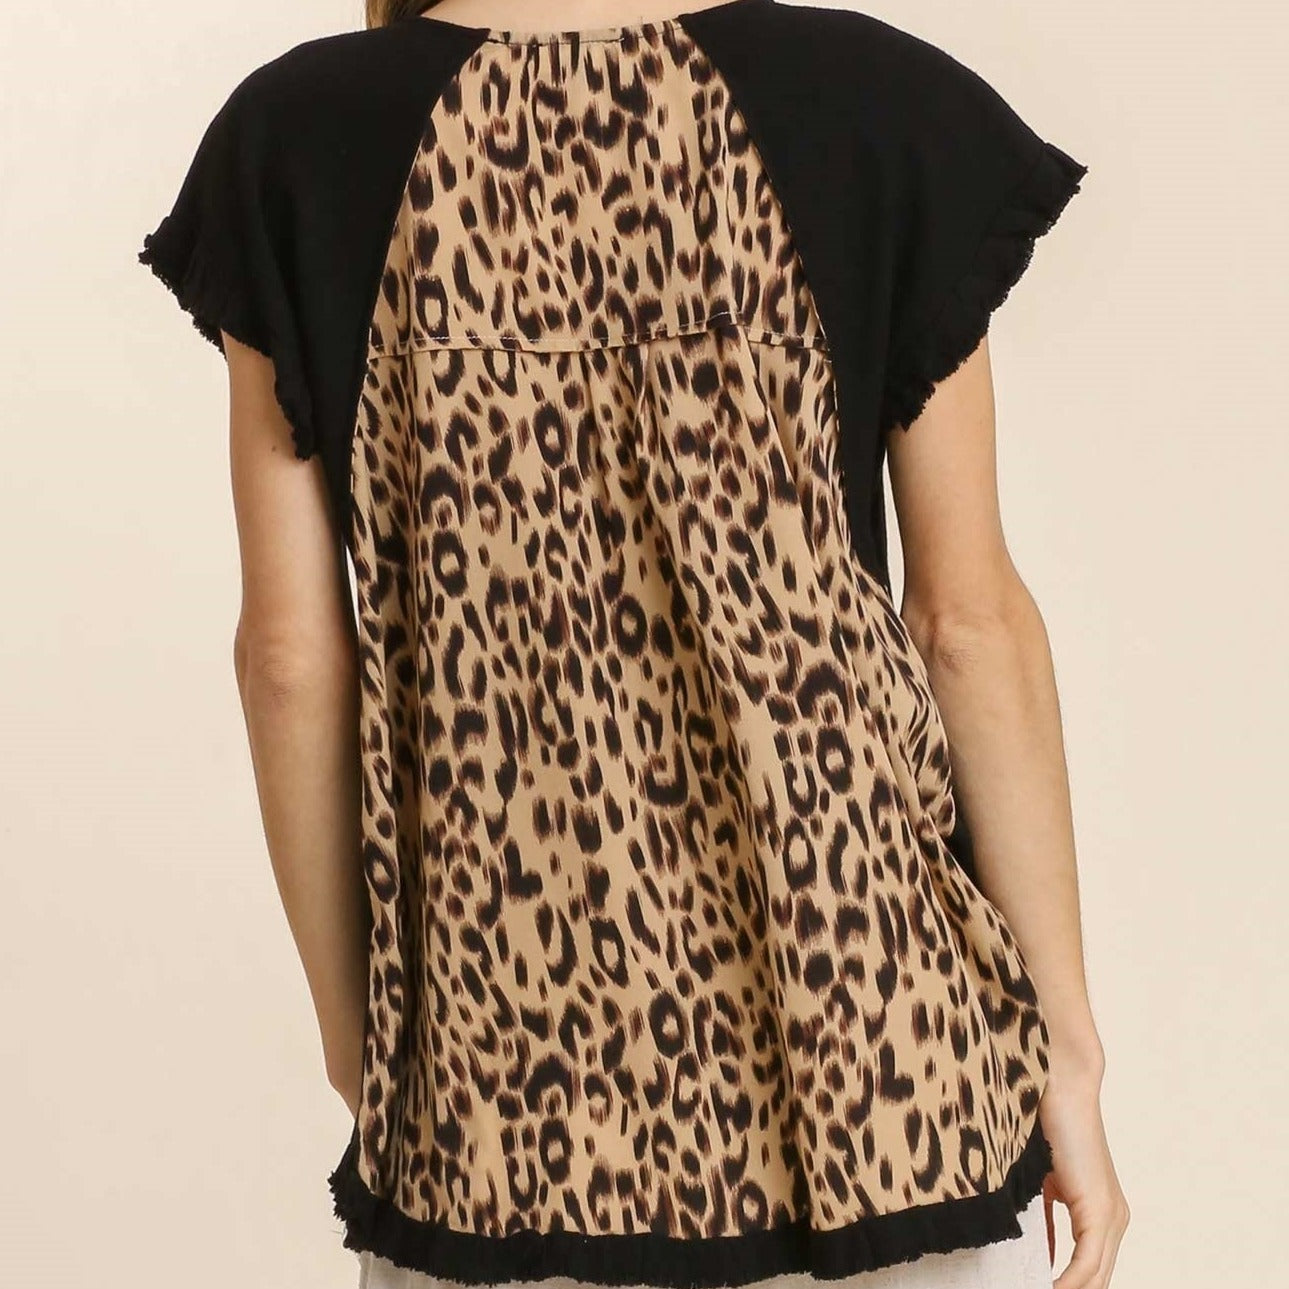 Linen Blend Short Ruffle Sleeve Top with Animal Print Scoop Back